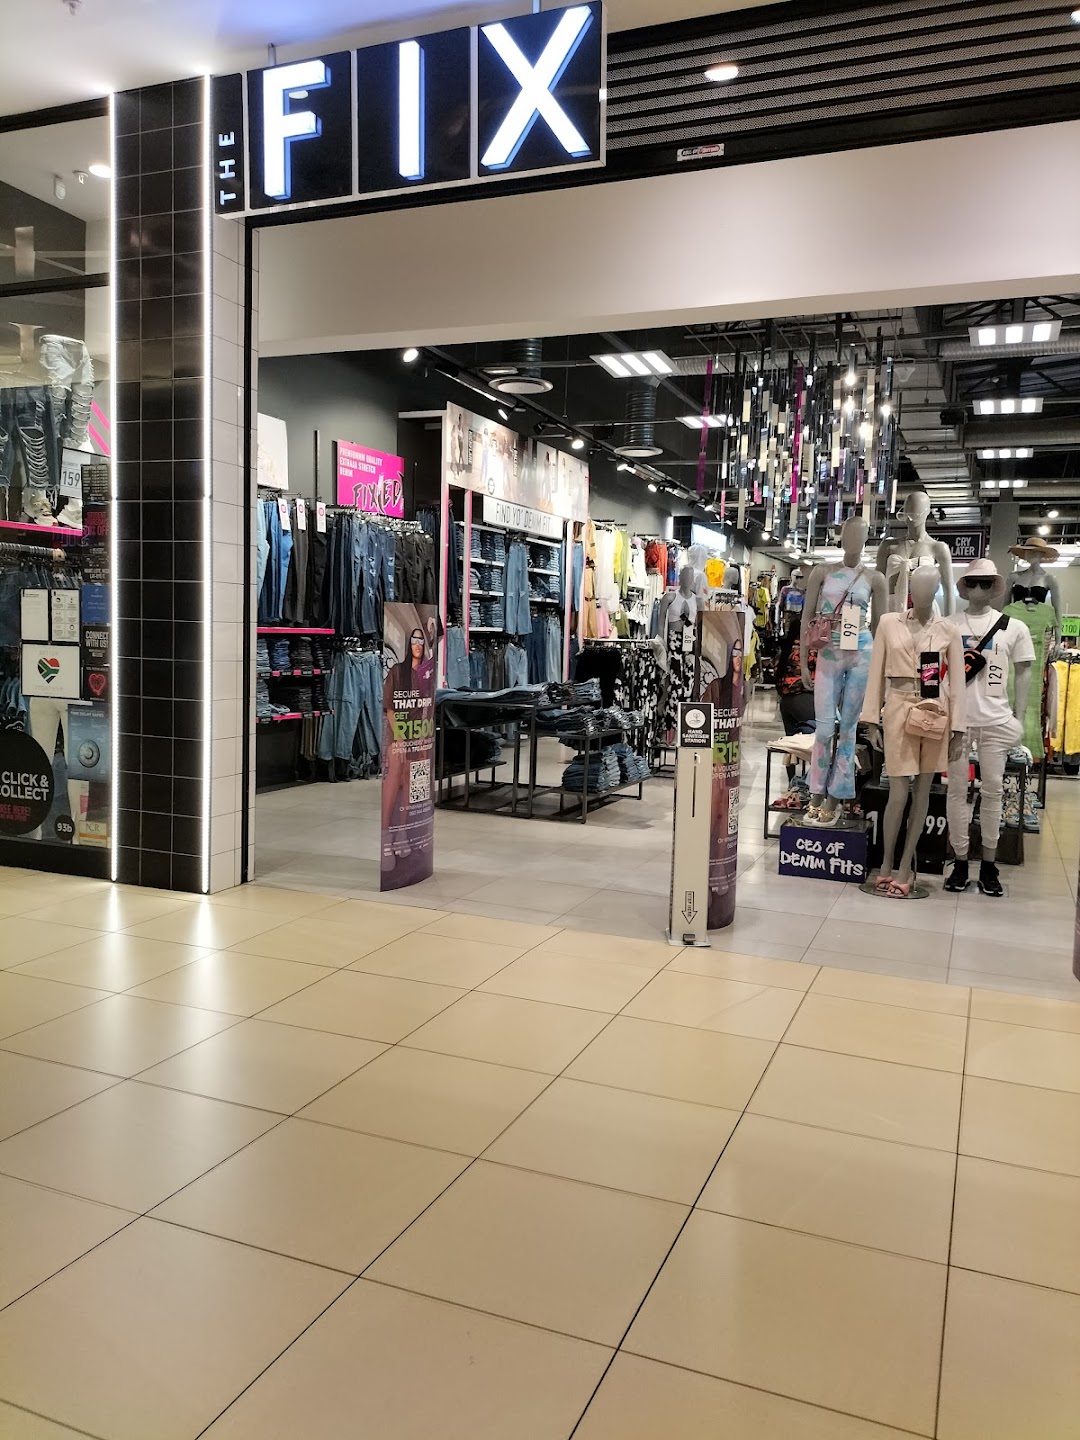 The FIX - East Rand Mall